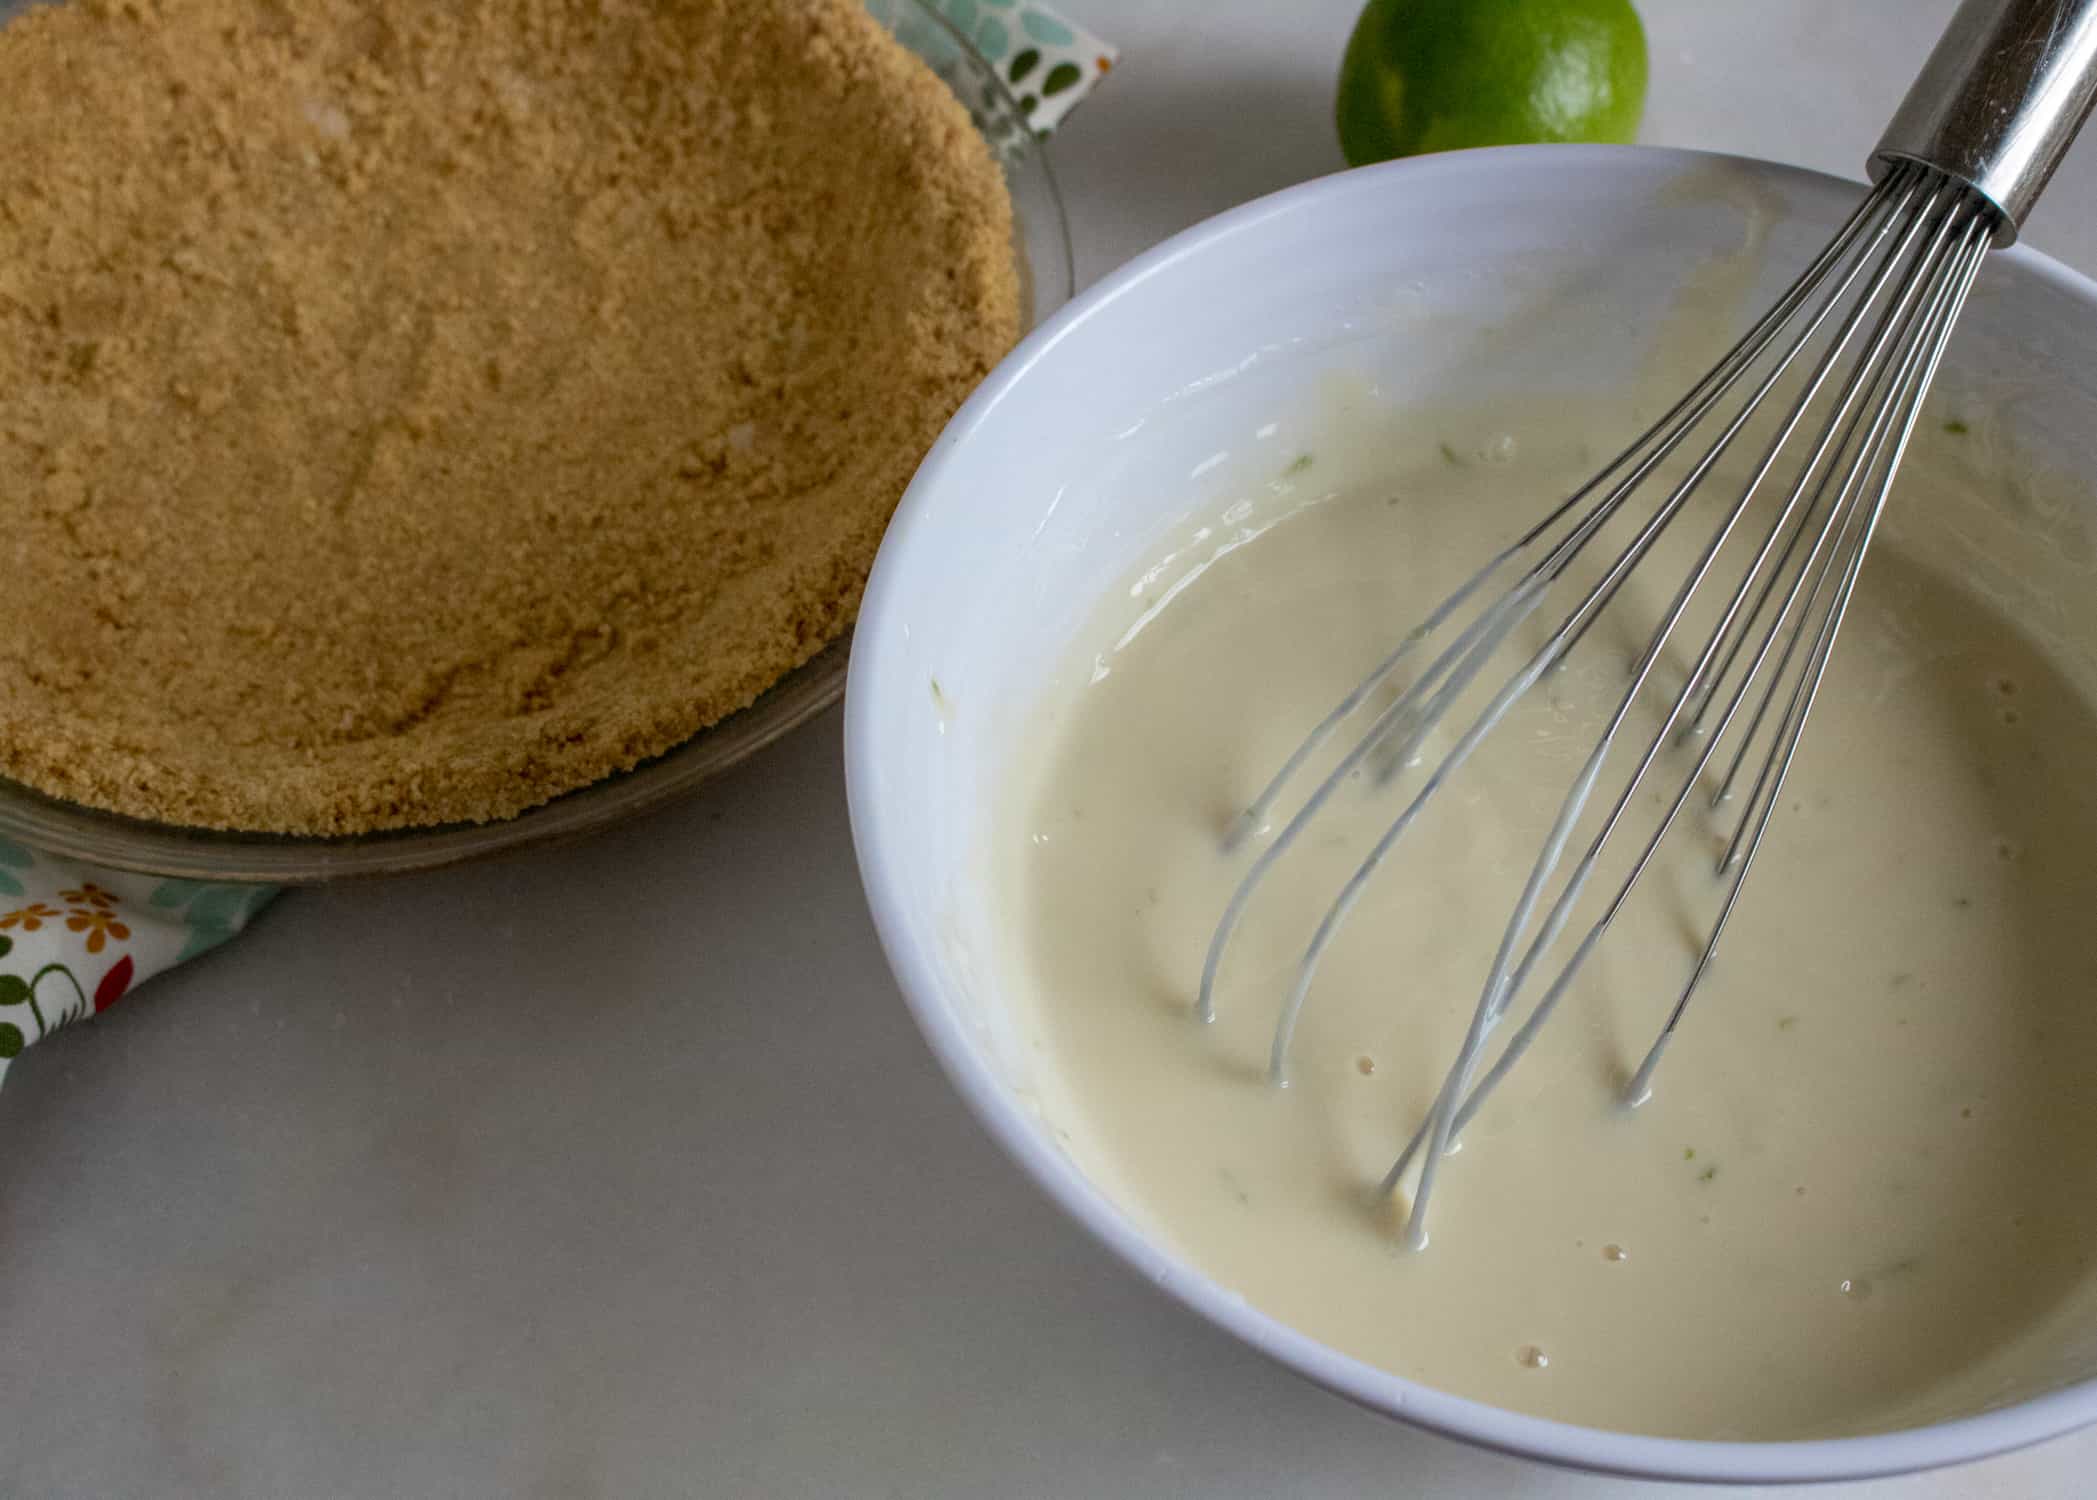 Graham cracker crust and filling mixture in a bowl with a whisk used to mix ingredients.